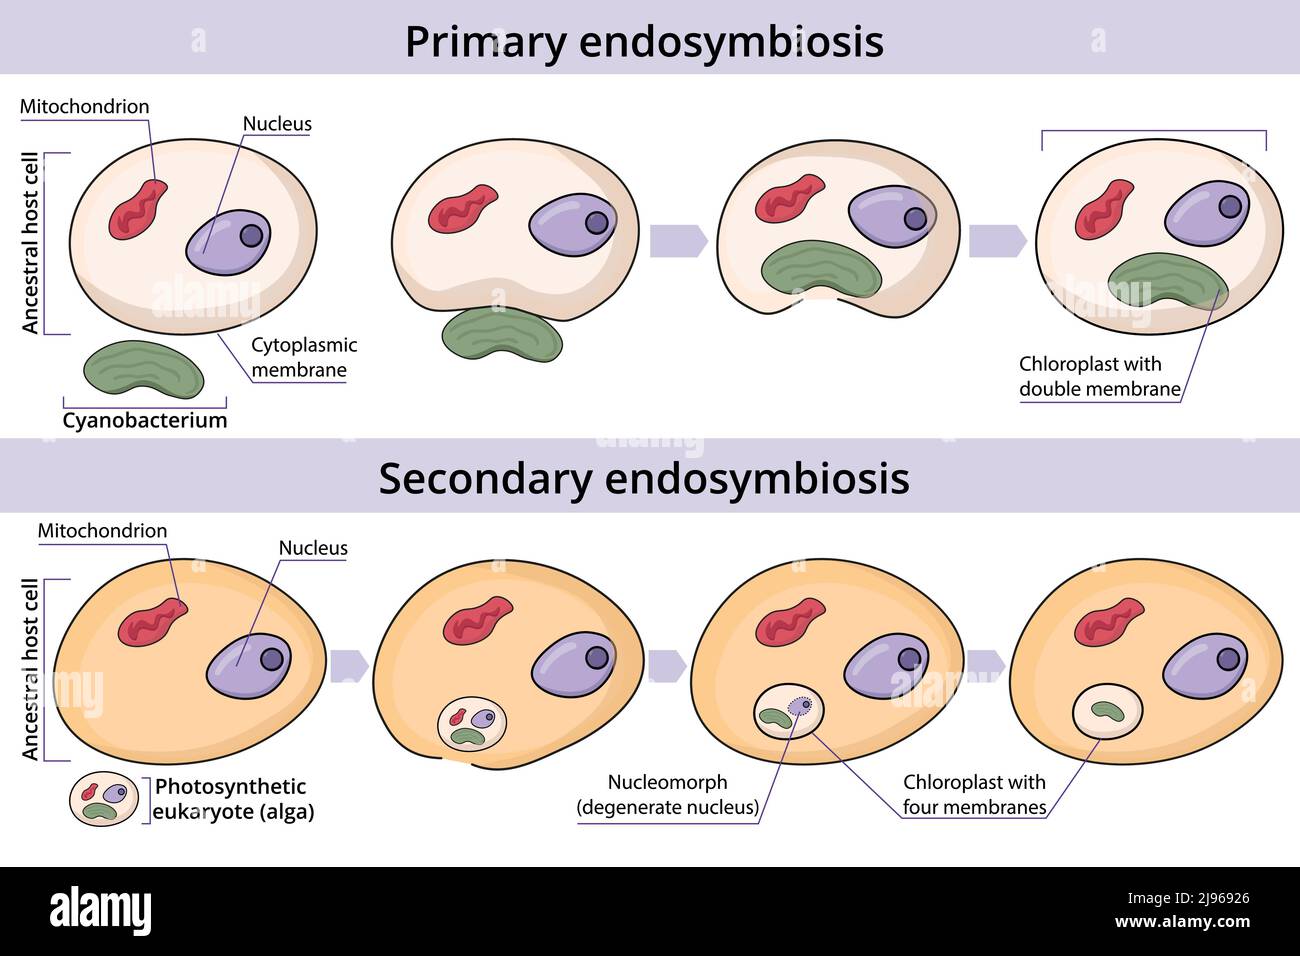 Primary and secondary endosymbiosis. Cell engulfs and absorbs a prokaryotic cell. An eukaryotic cell engulfs and absorbs another eukaryotic cell. Stock Vector